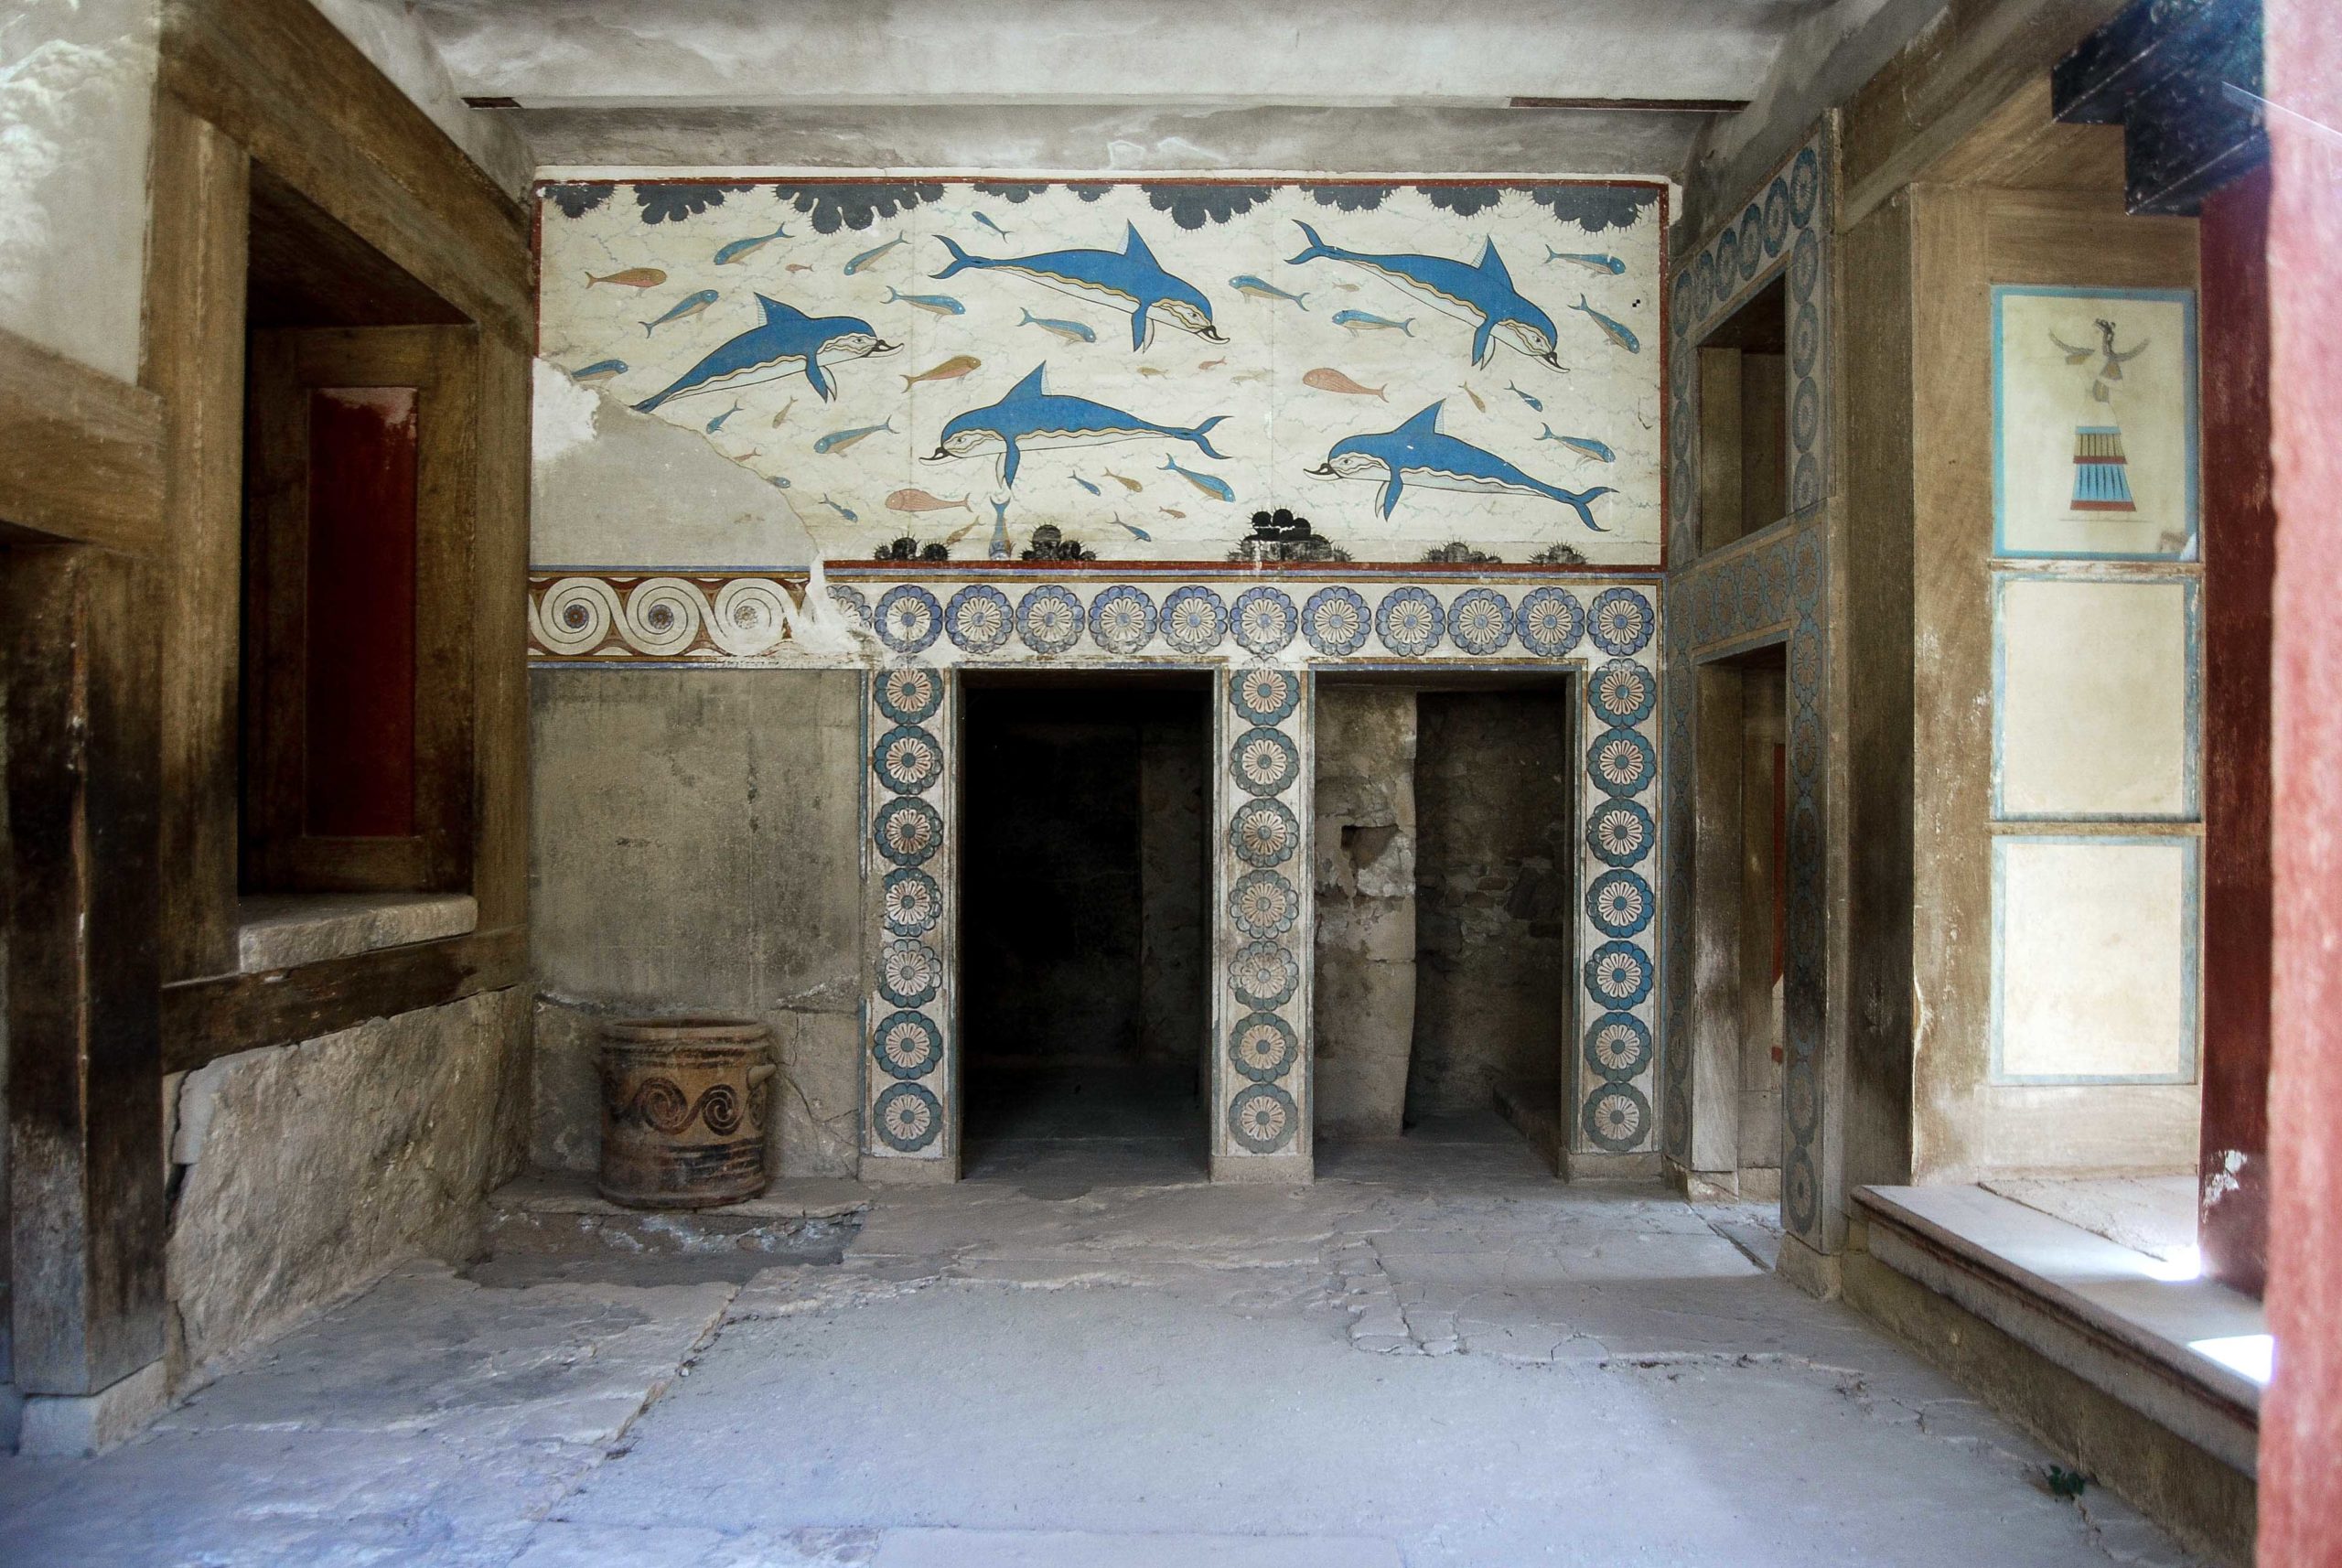 "Queen's megaron," east wing, Knossos (Andy Montgomery, CC BY-SA 2.0)